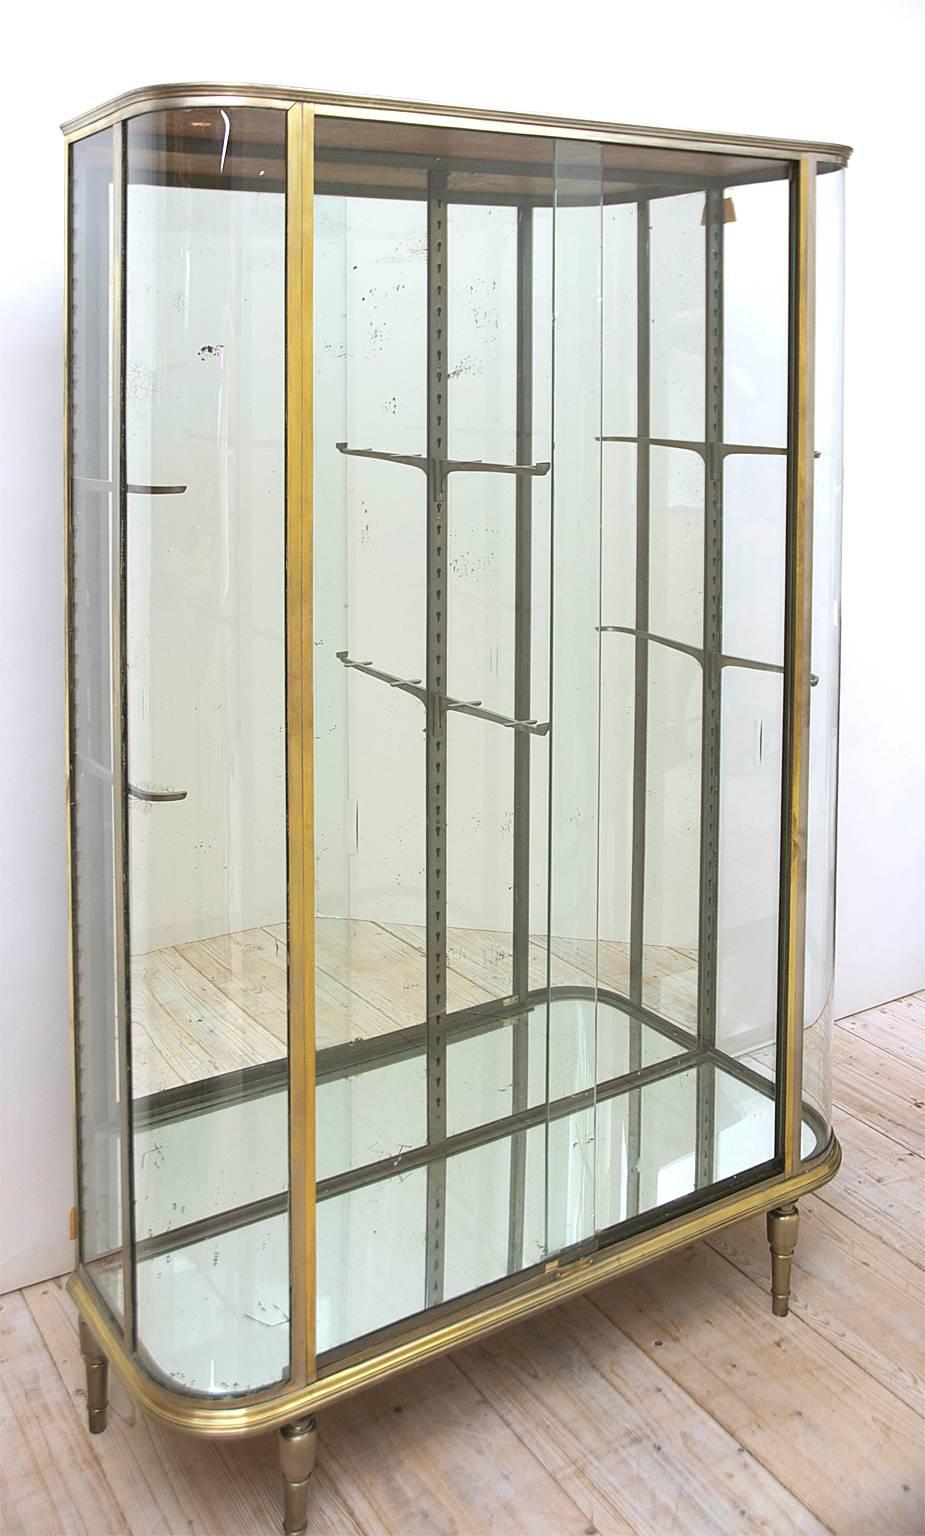 An exquisite Art Deco Vitrine with rounded glass and brass frame, circa 1920. Brass alloy conveys a silver quality more so then yellow gold. 
The most important elements of this vitrine are in tact which are the metal frame and the shaped glass on